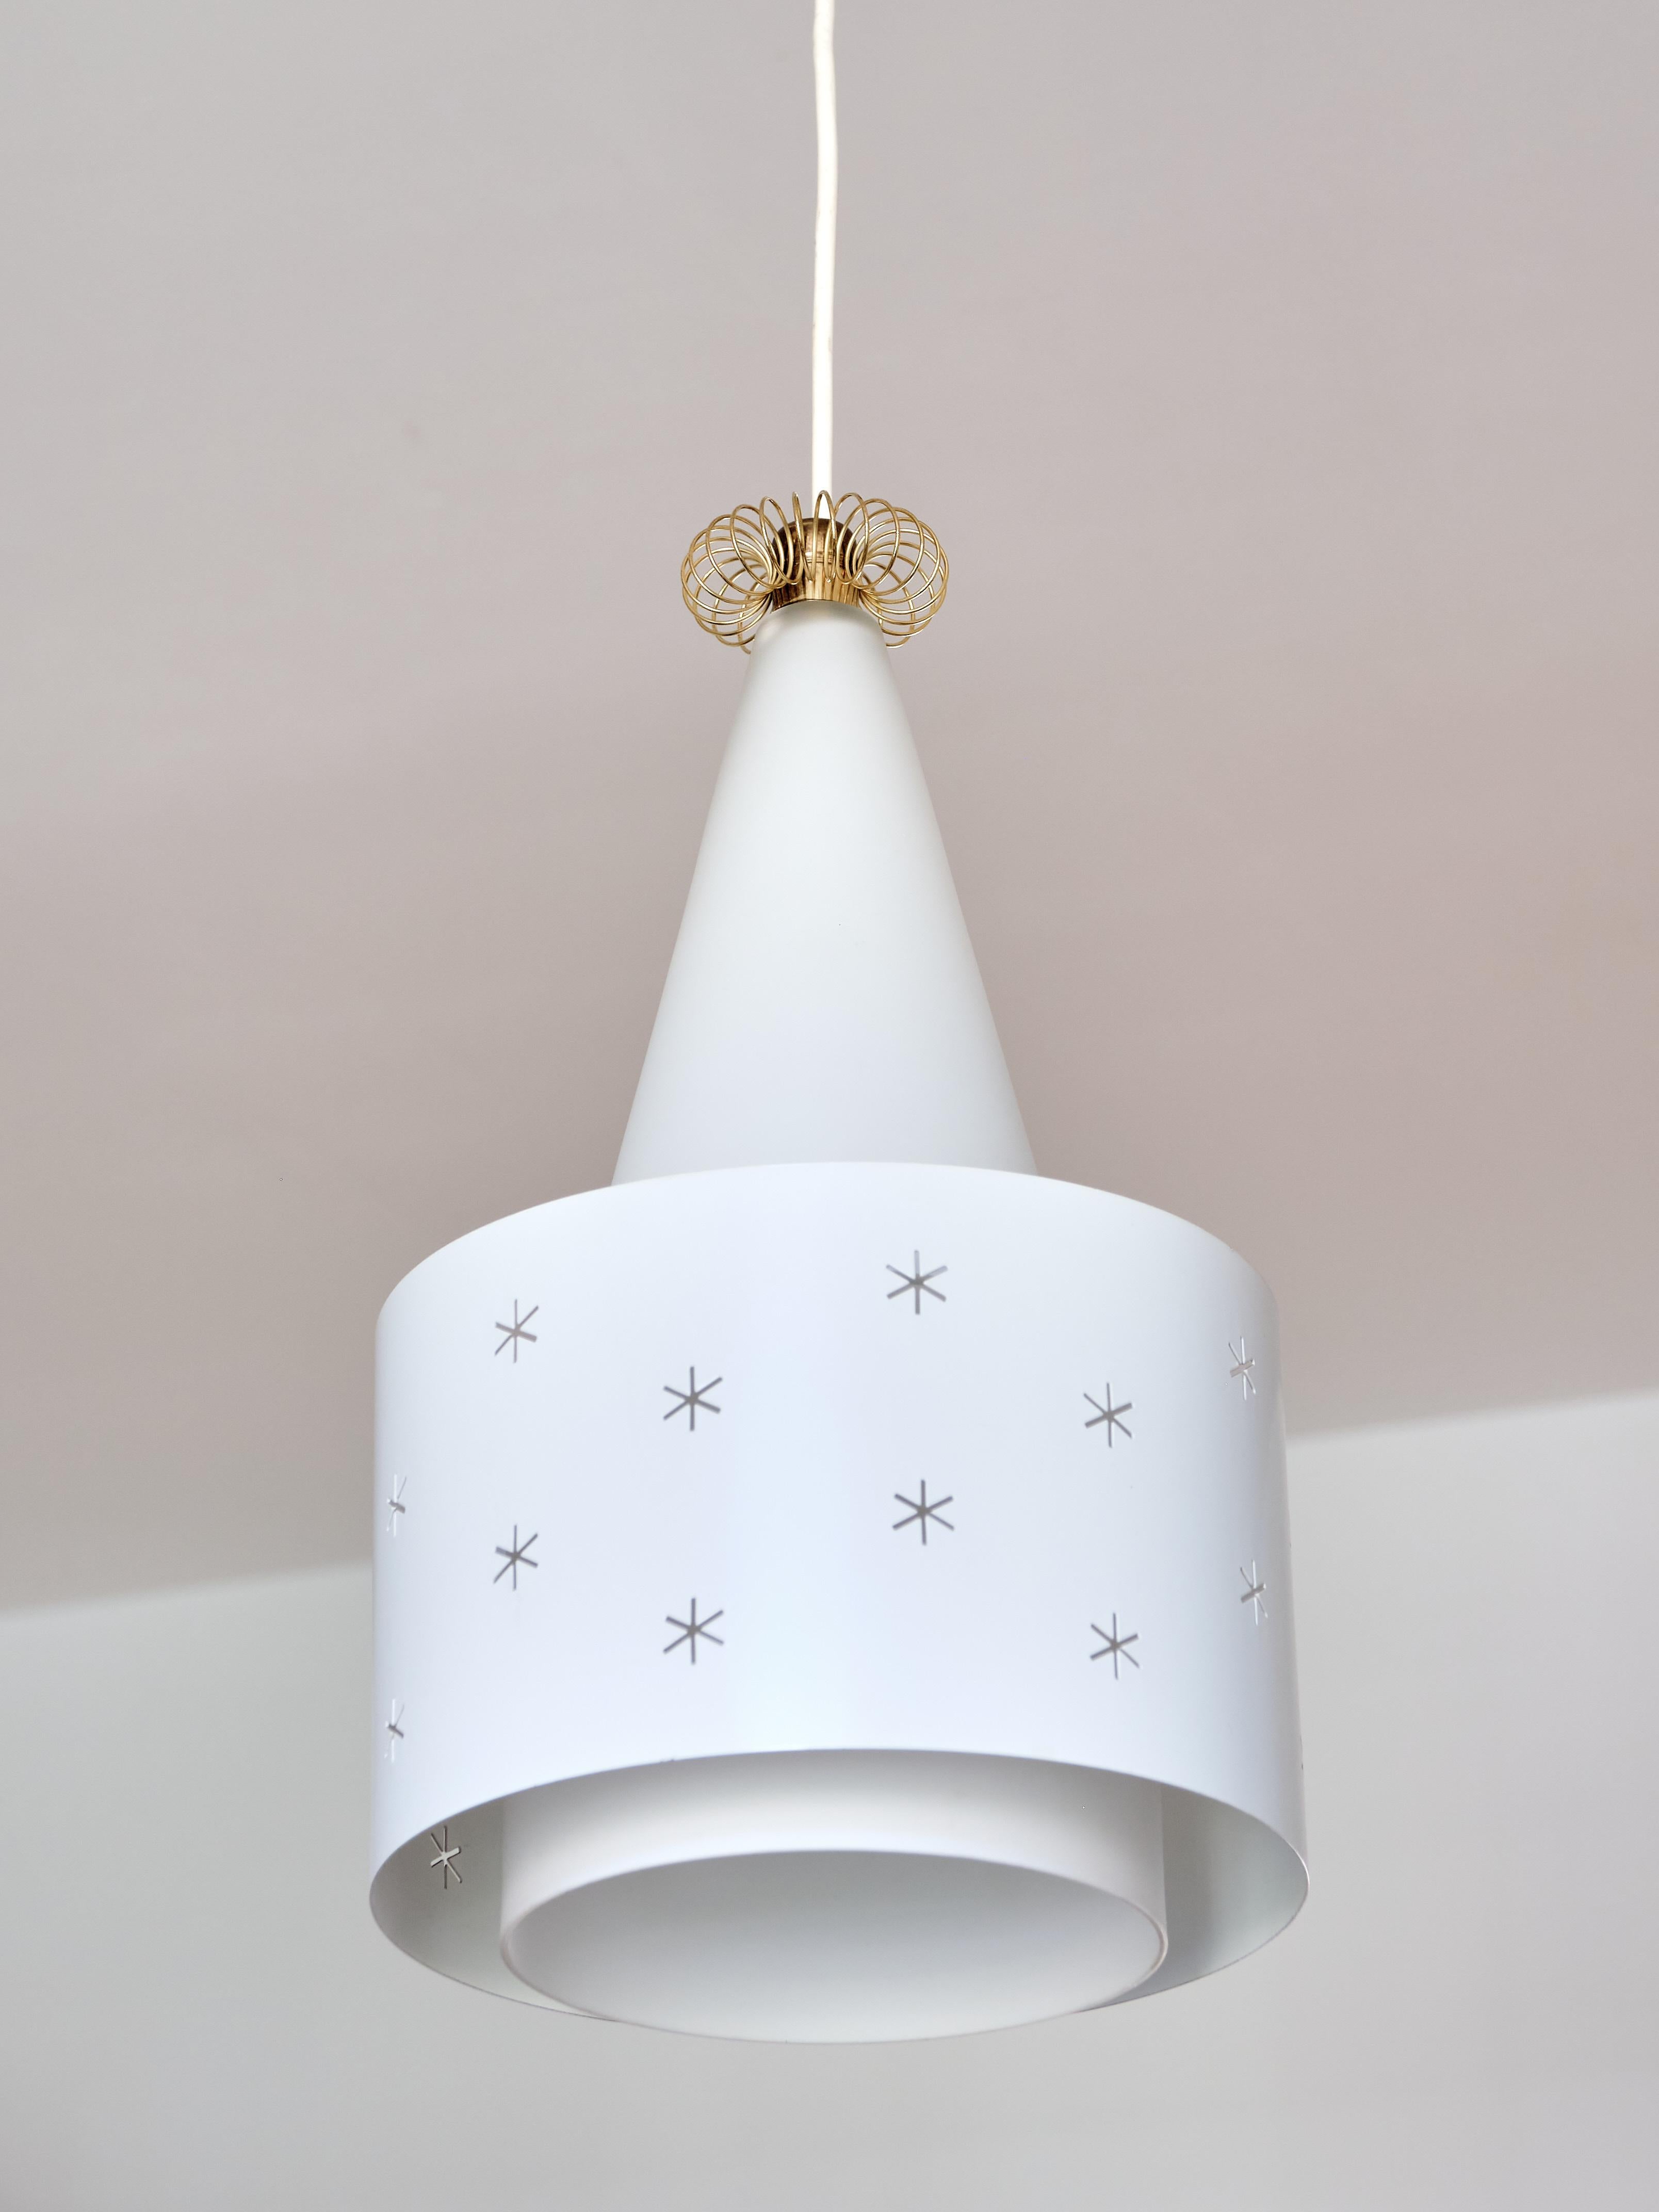 White Paavo Tynell Pendant, Model K2-10, Idman, Finland, 1955 For Sale 1